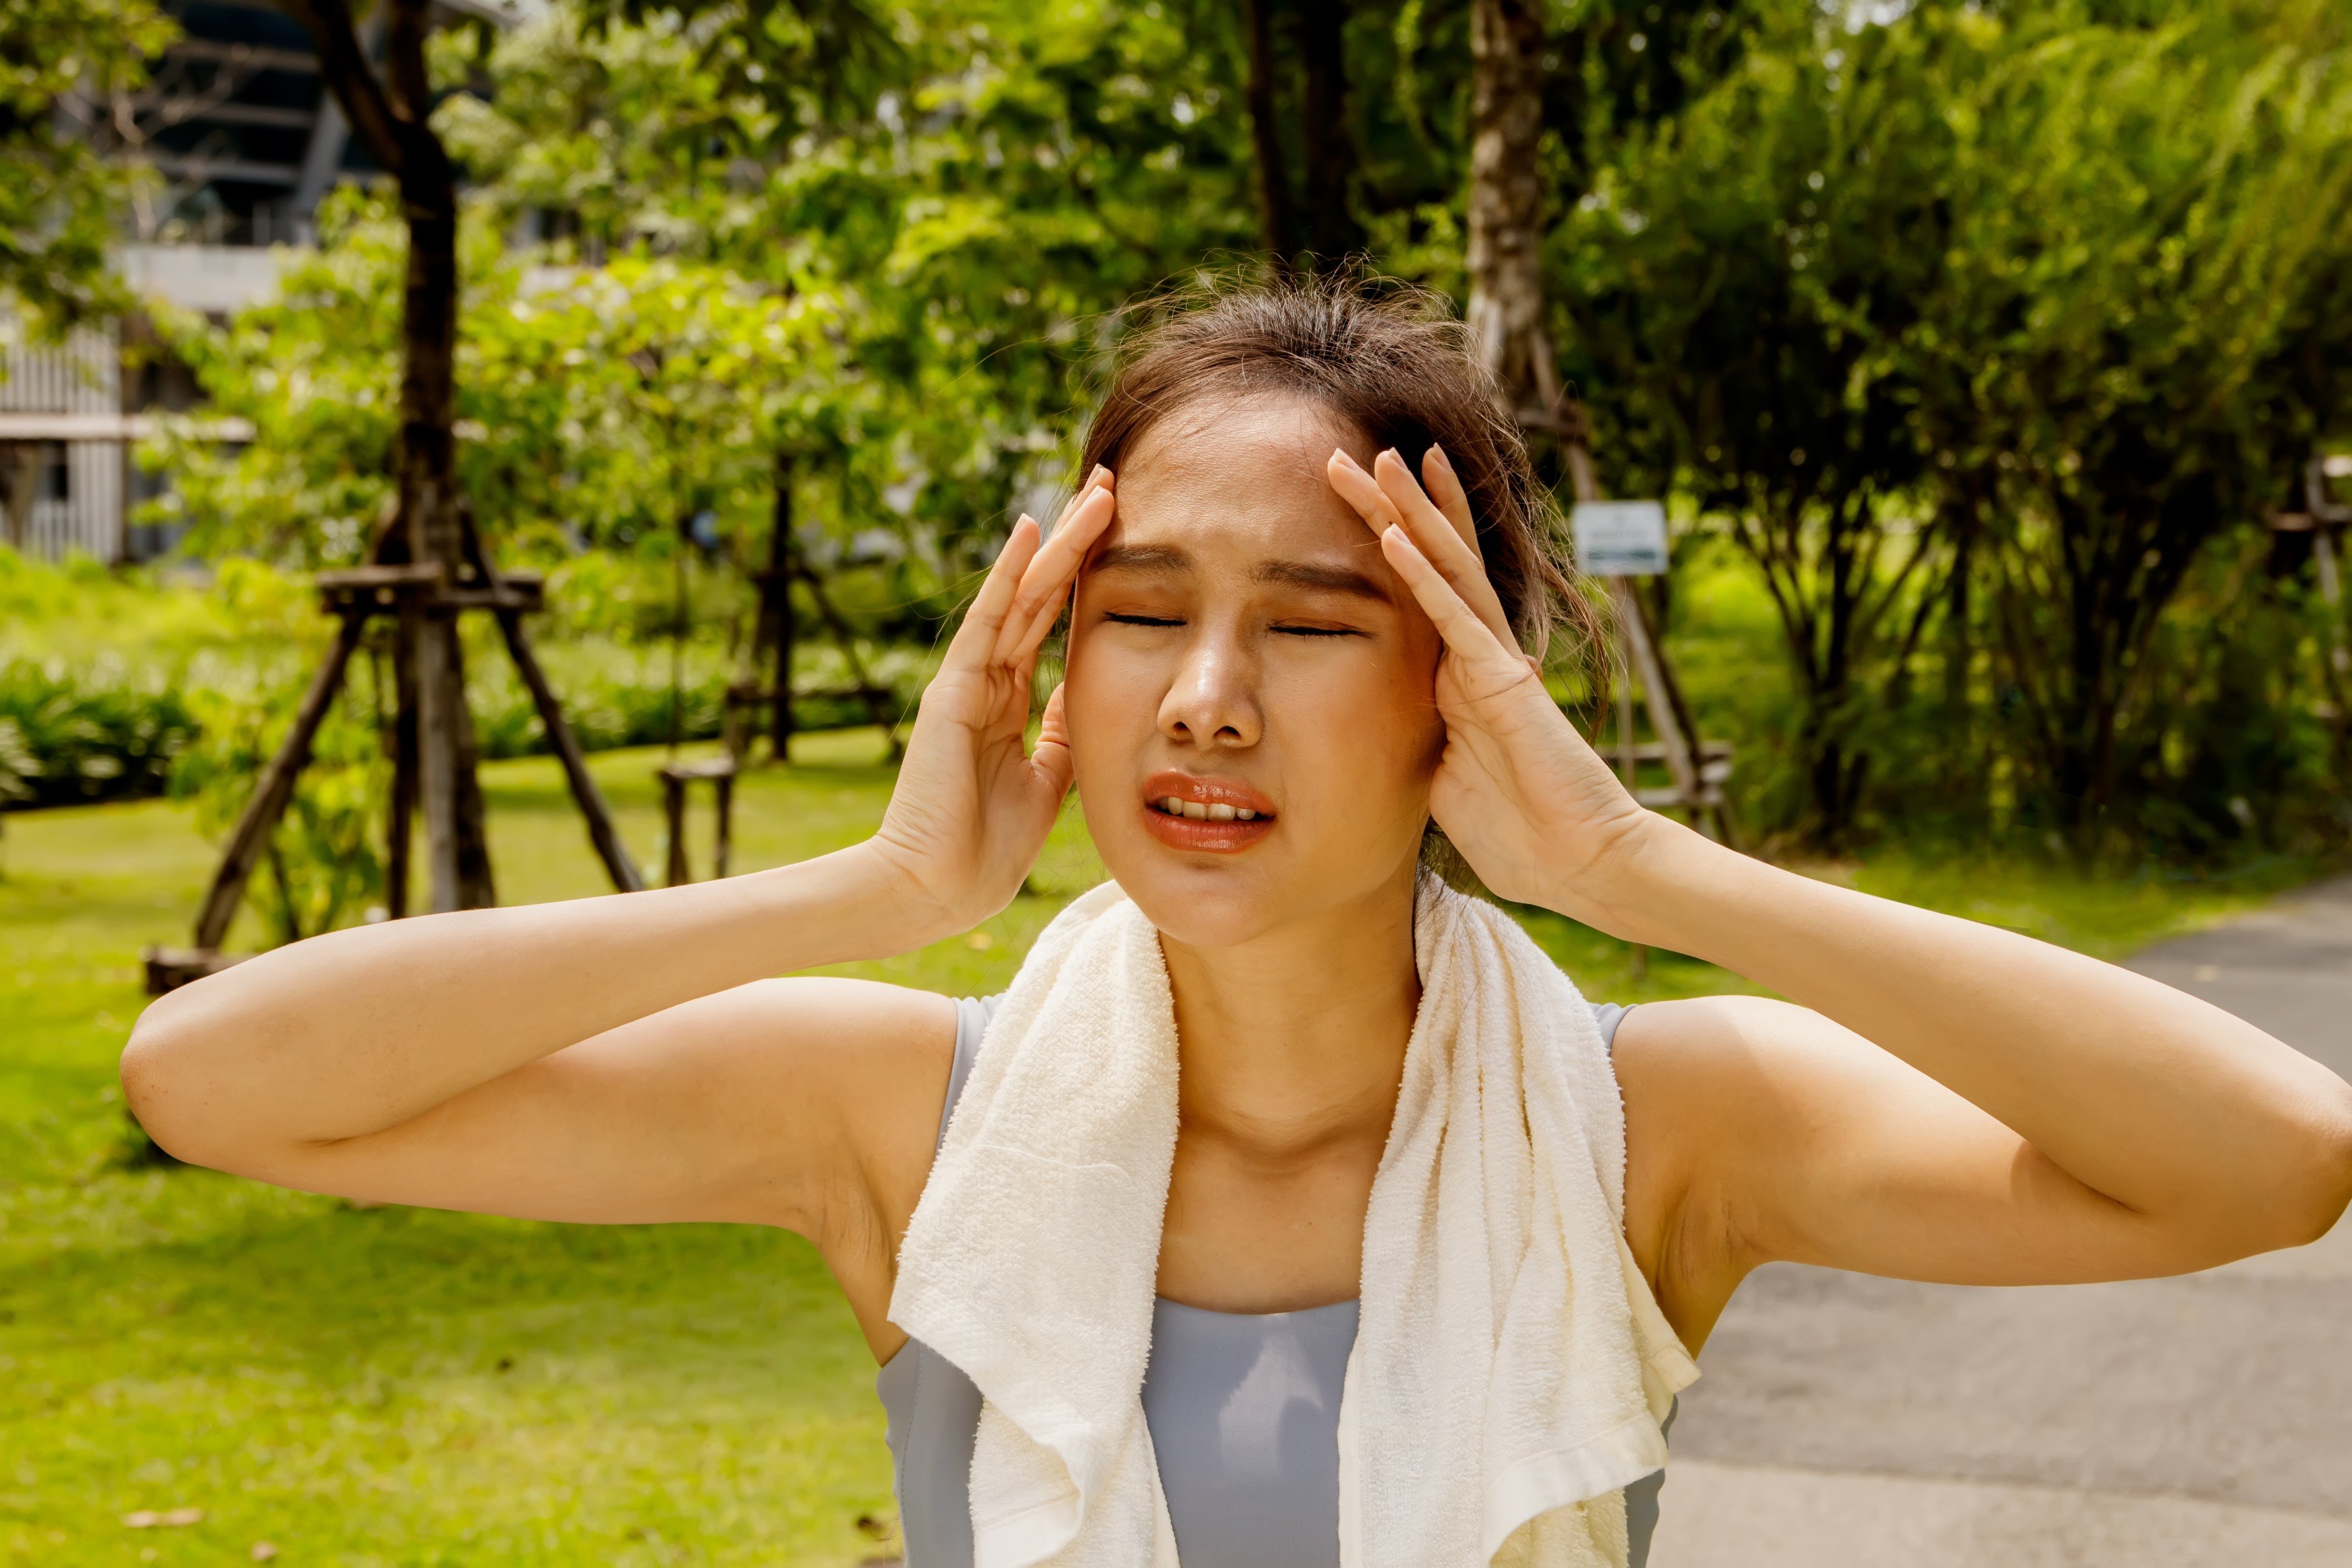 Extreme heat can affect medications, making some less effective and amplifying others’ side effects, and causing dehydration. Experts share tips to stay safe. Photo: Shutterstock  
